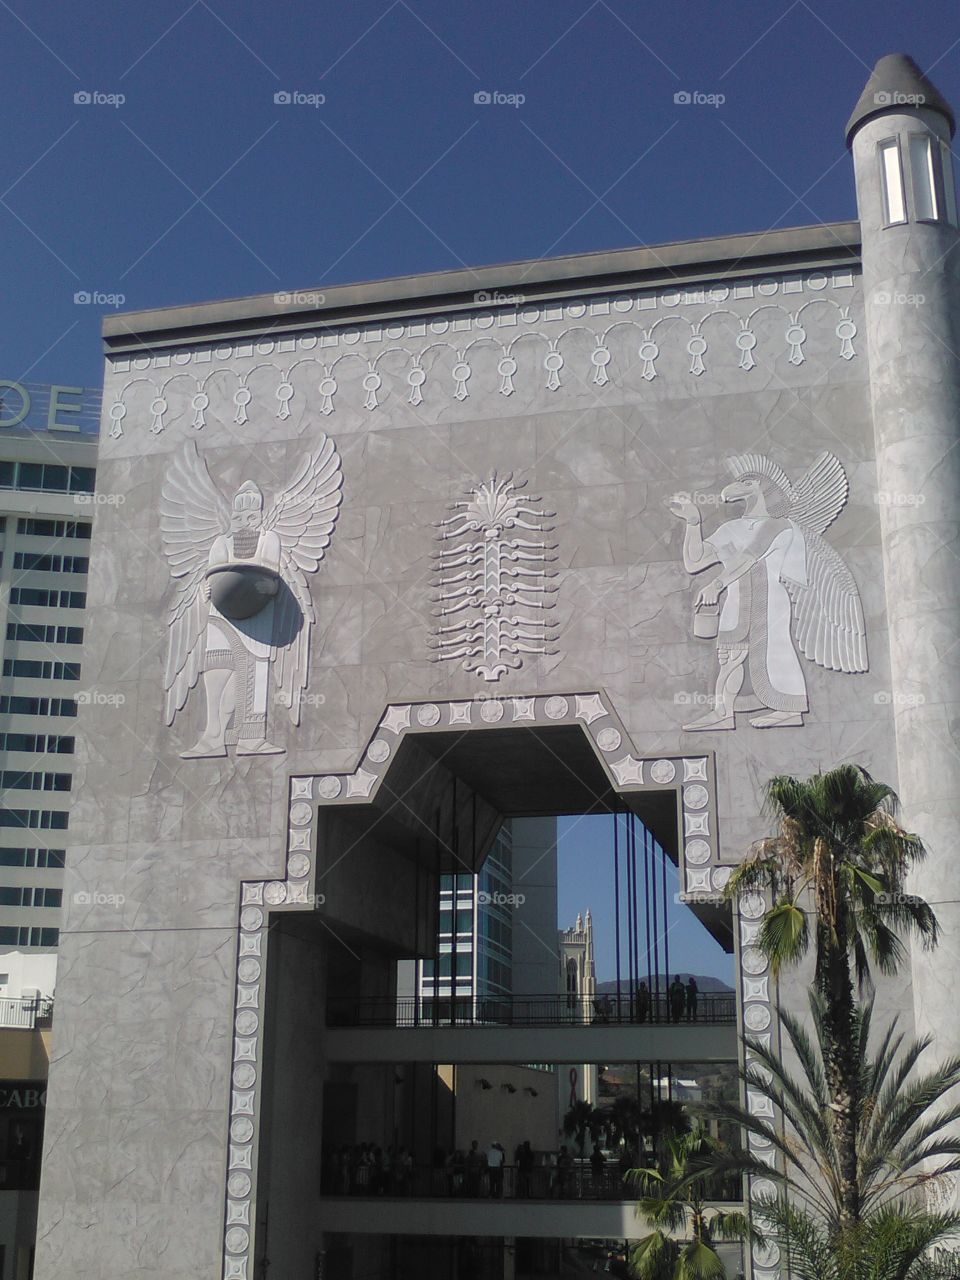 Kodak Theater wall carvings. outside wall of the Kodak Theater in Hollywood